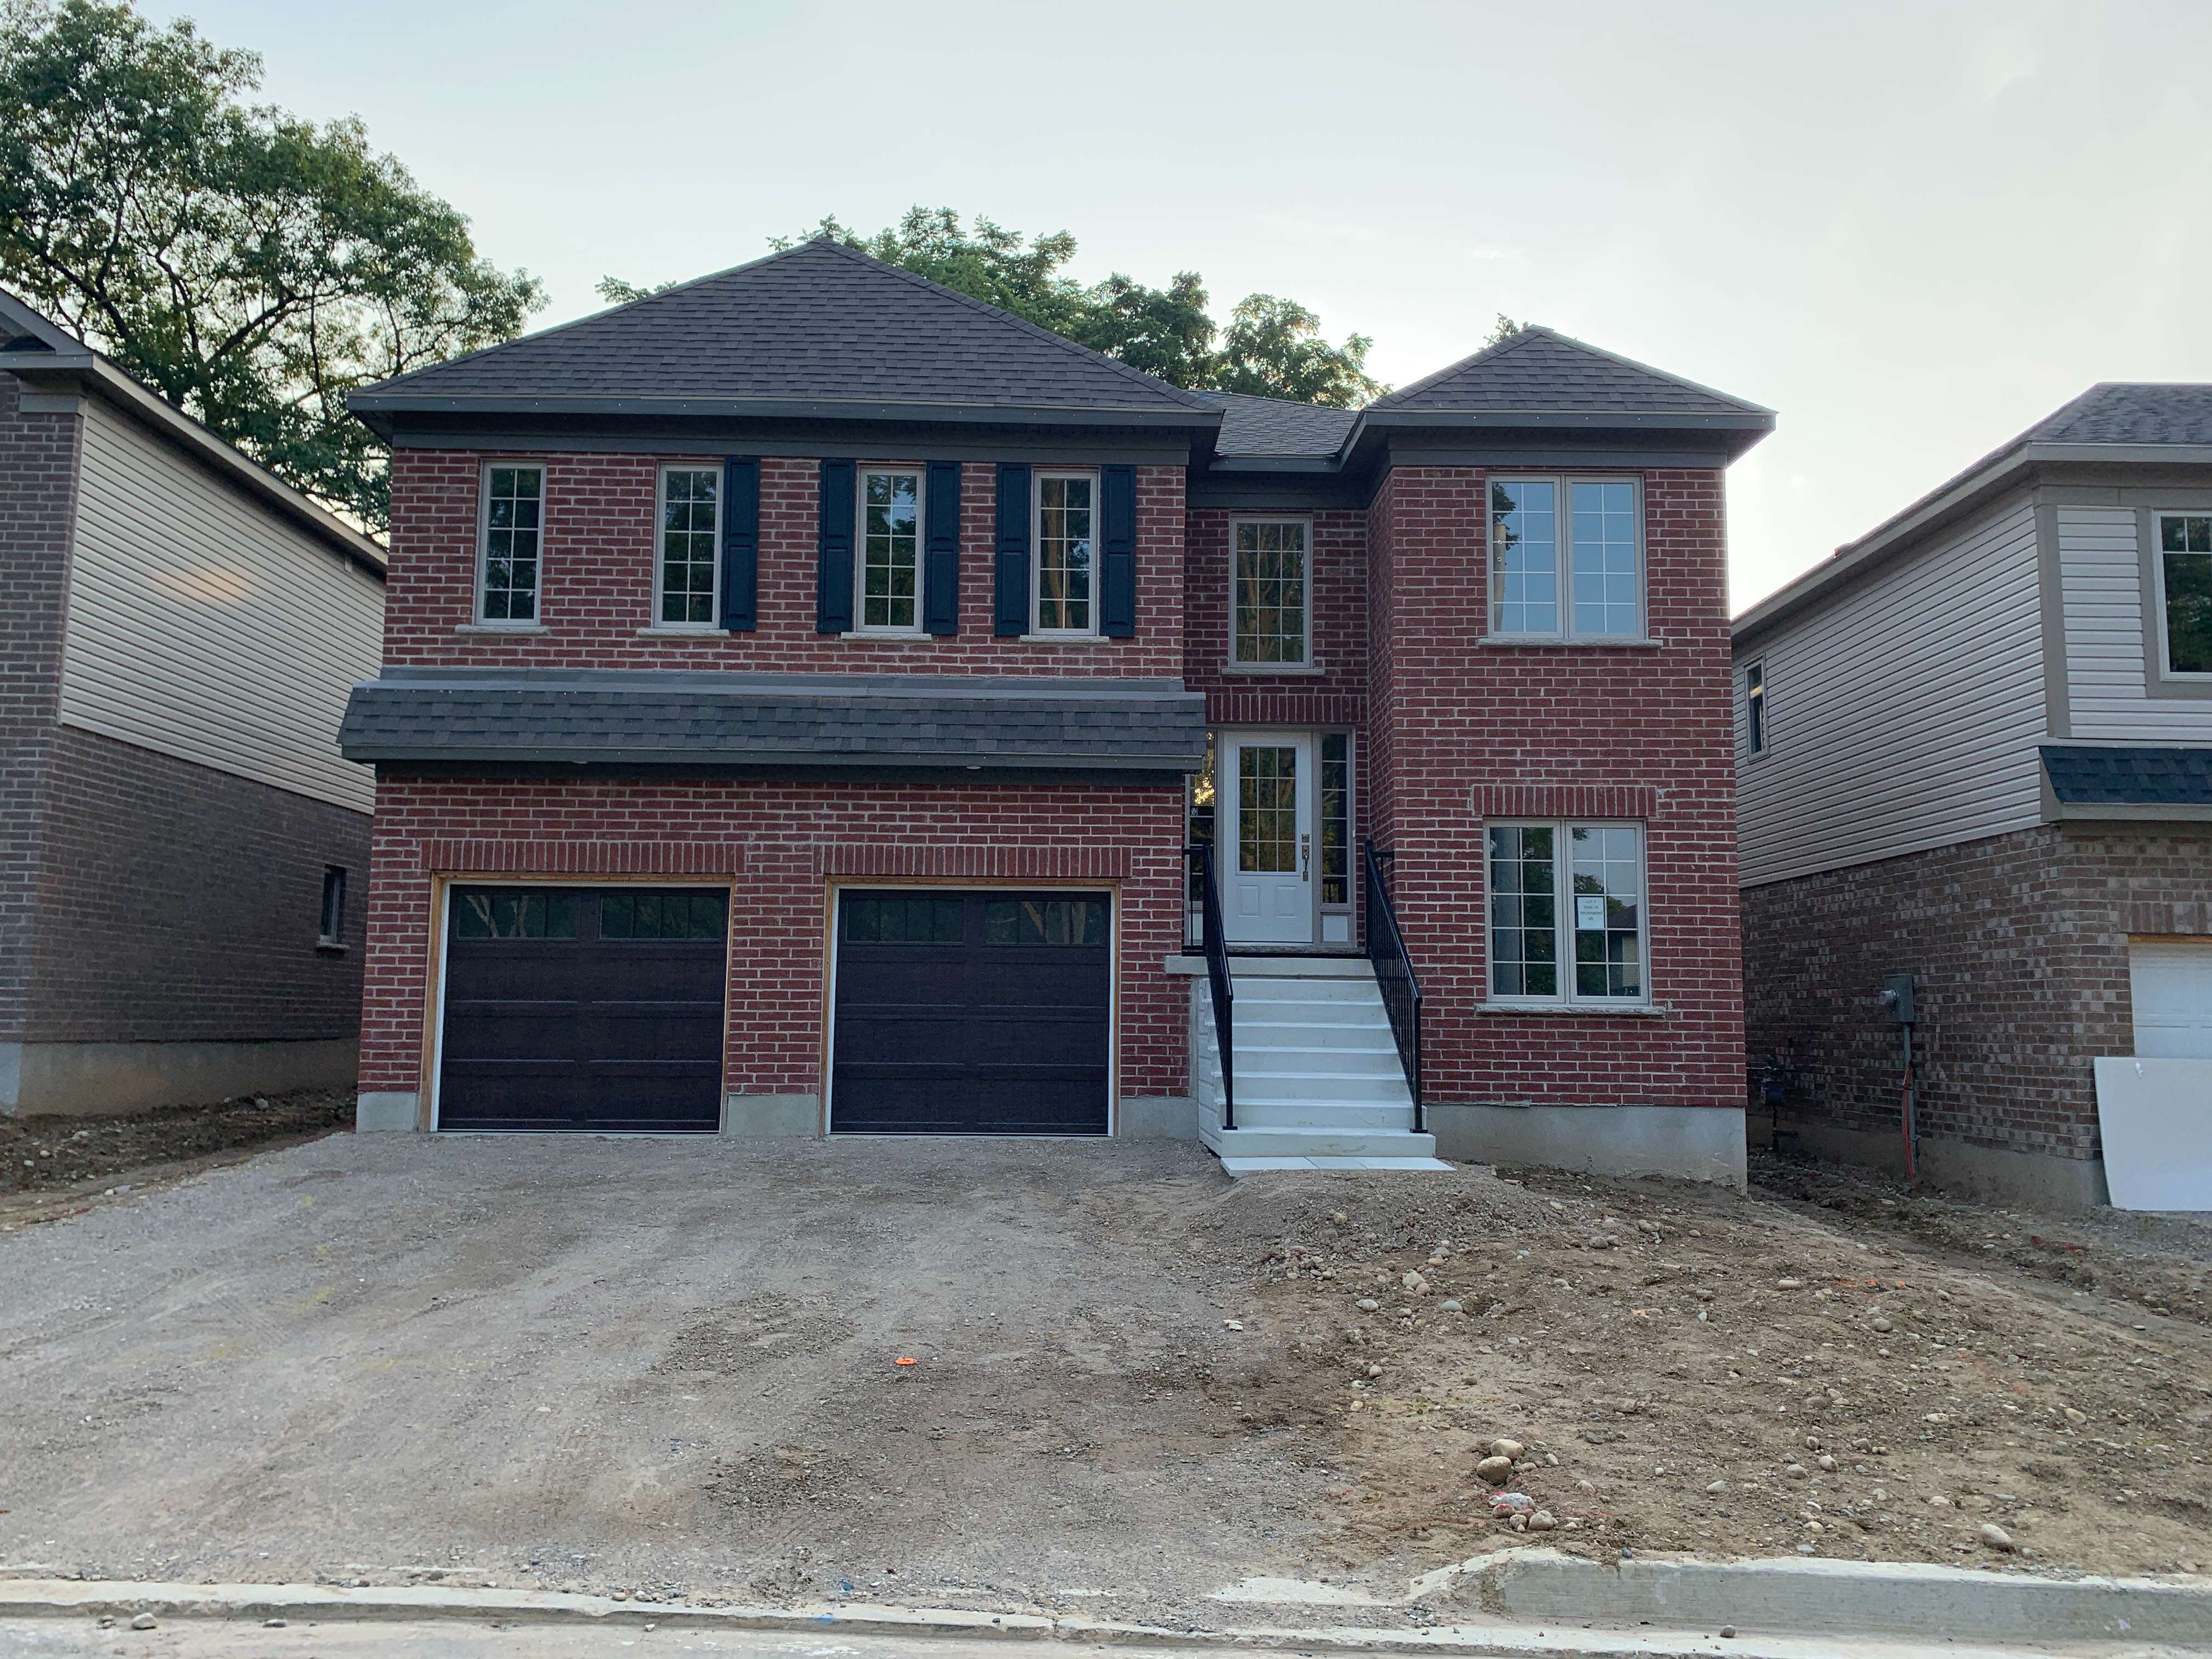 BRAND-NEW 3+2 bdrm 3 bath detached House in Doon South, min to hwy 401